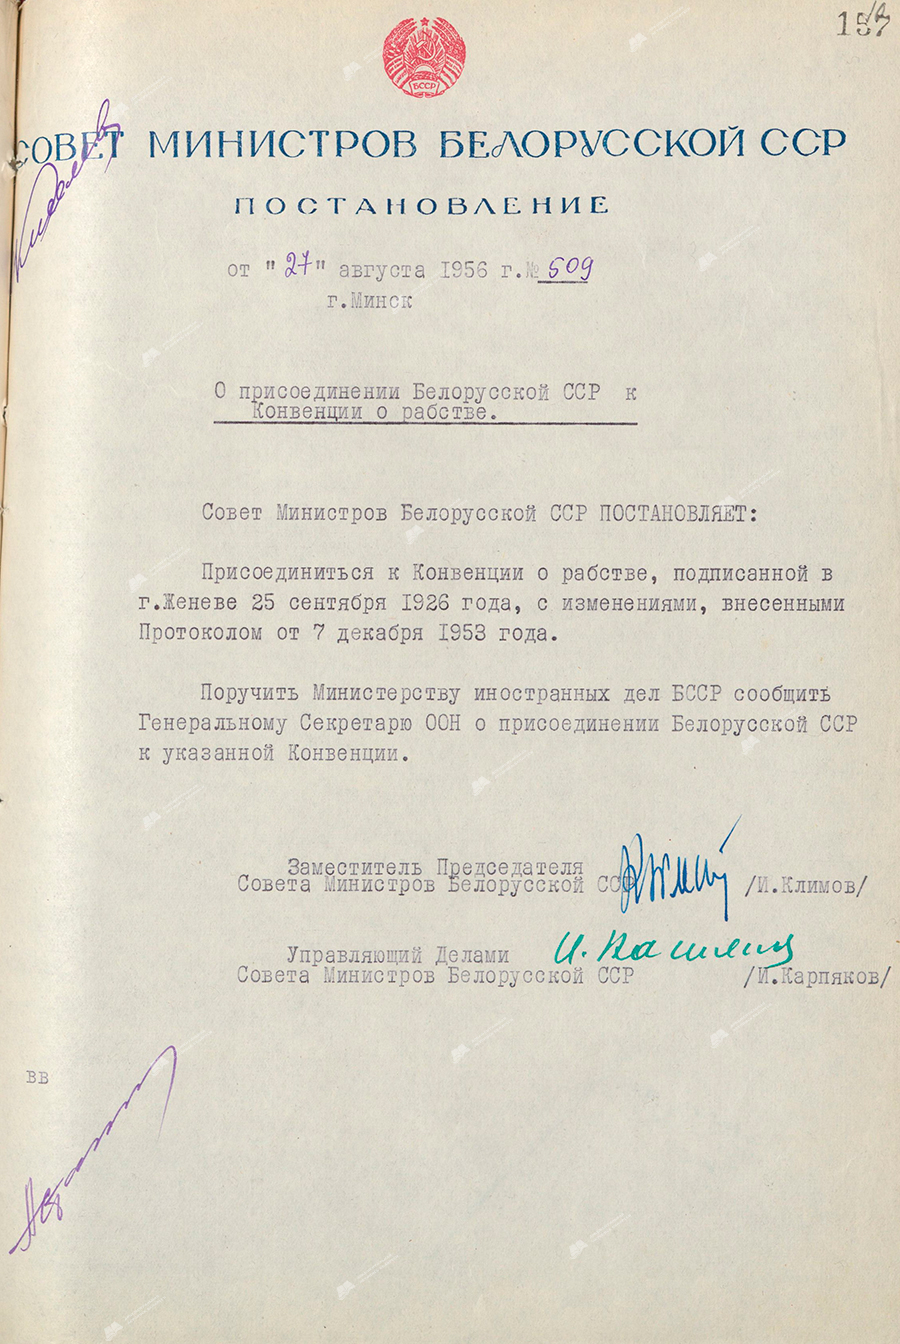 Resolution No. 509 of the Council of Ministers of the Byelorussian SSR «On the accession of the Byelorussian SSR to the Slavery Convention»-стр. 0